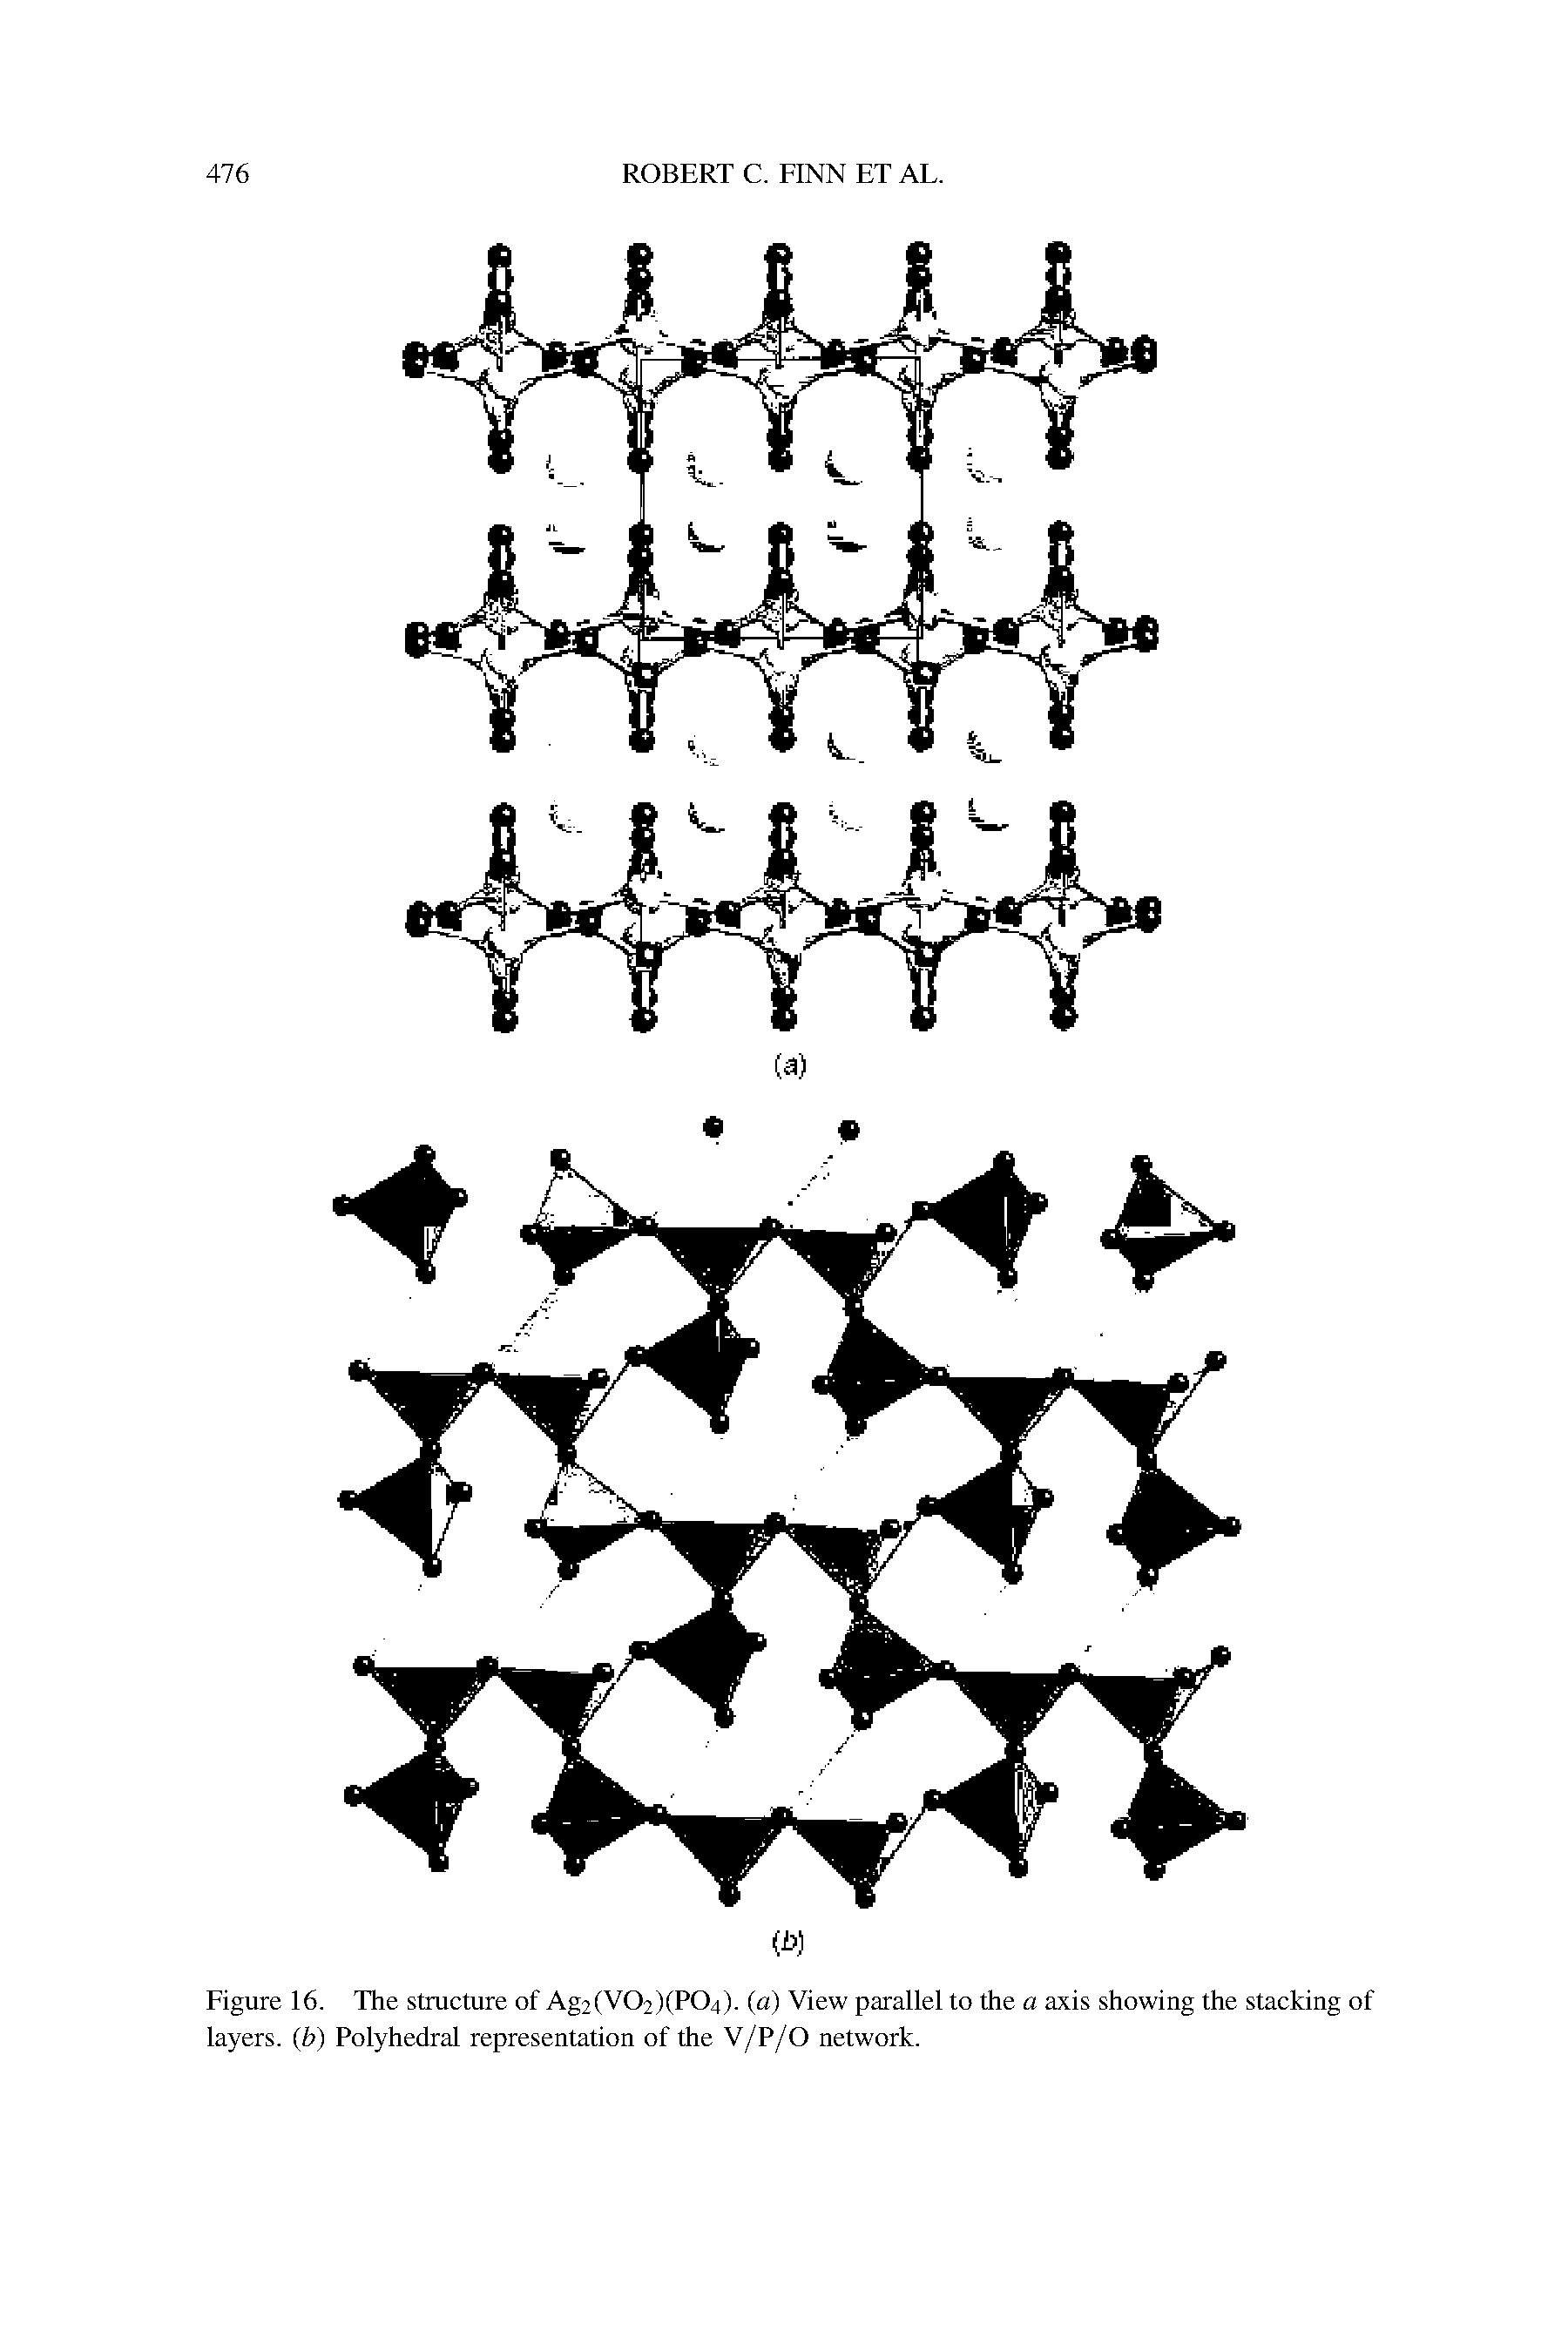 Figure 16. The structure of Ag2(V02)(P04). (a) View parallel to the a axis showing the stacking of layers, (h) Polyhedral representation of the V/P/O network.